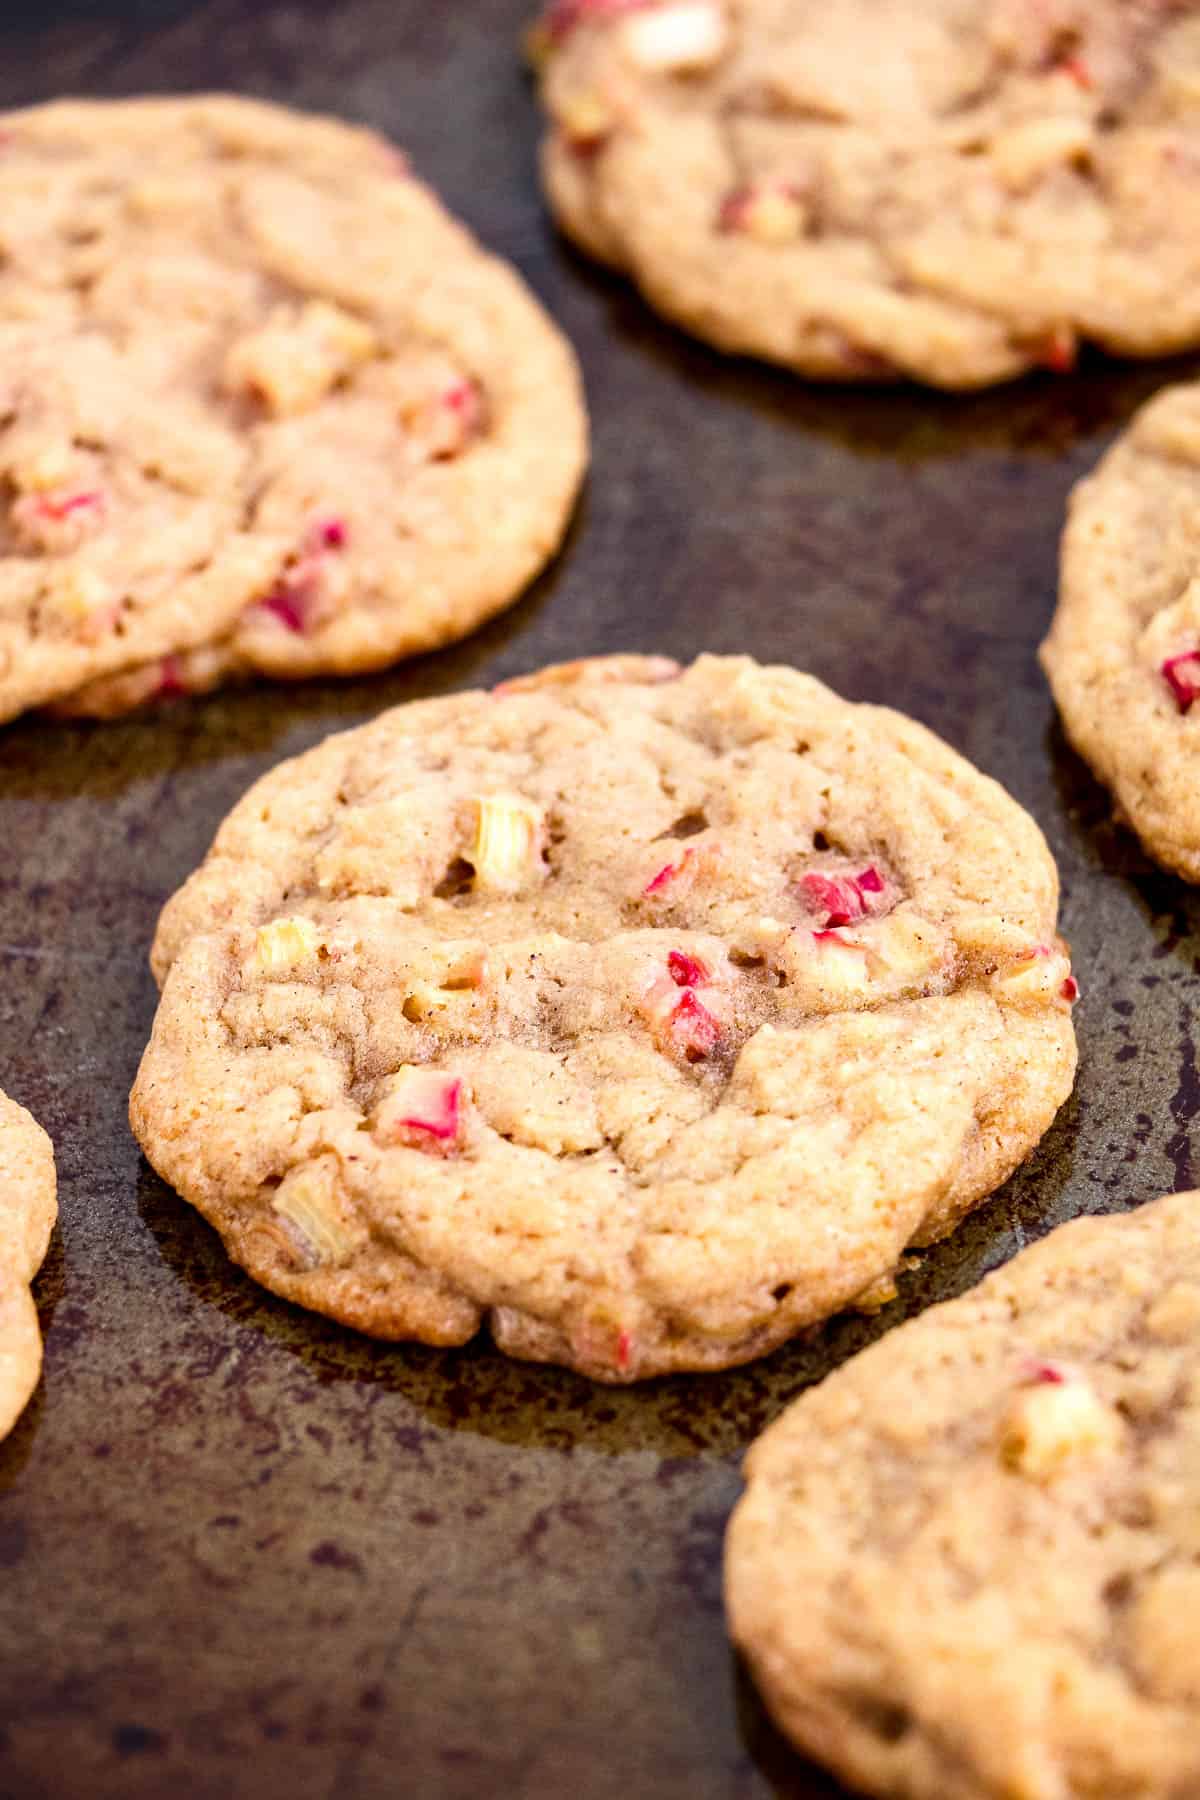 Baked rhubarb cookies on a baking sheet.